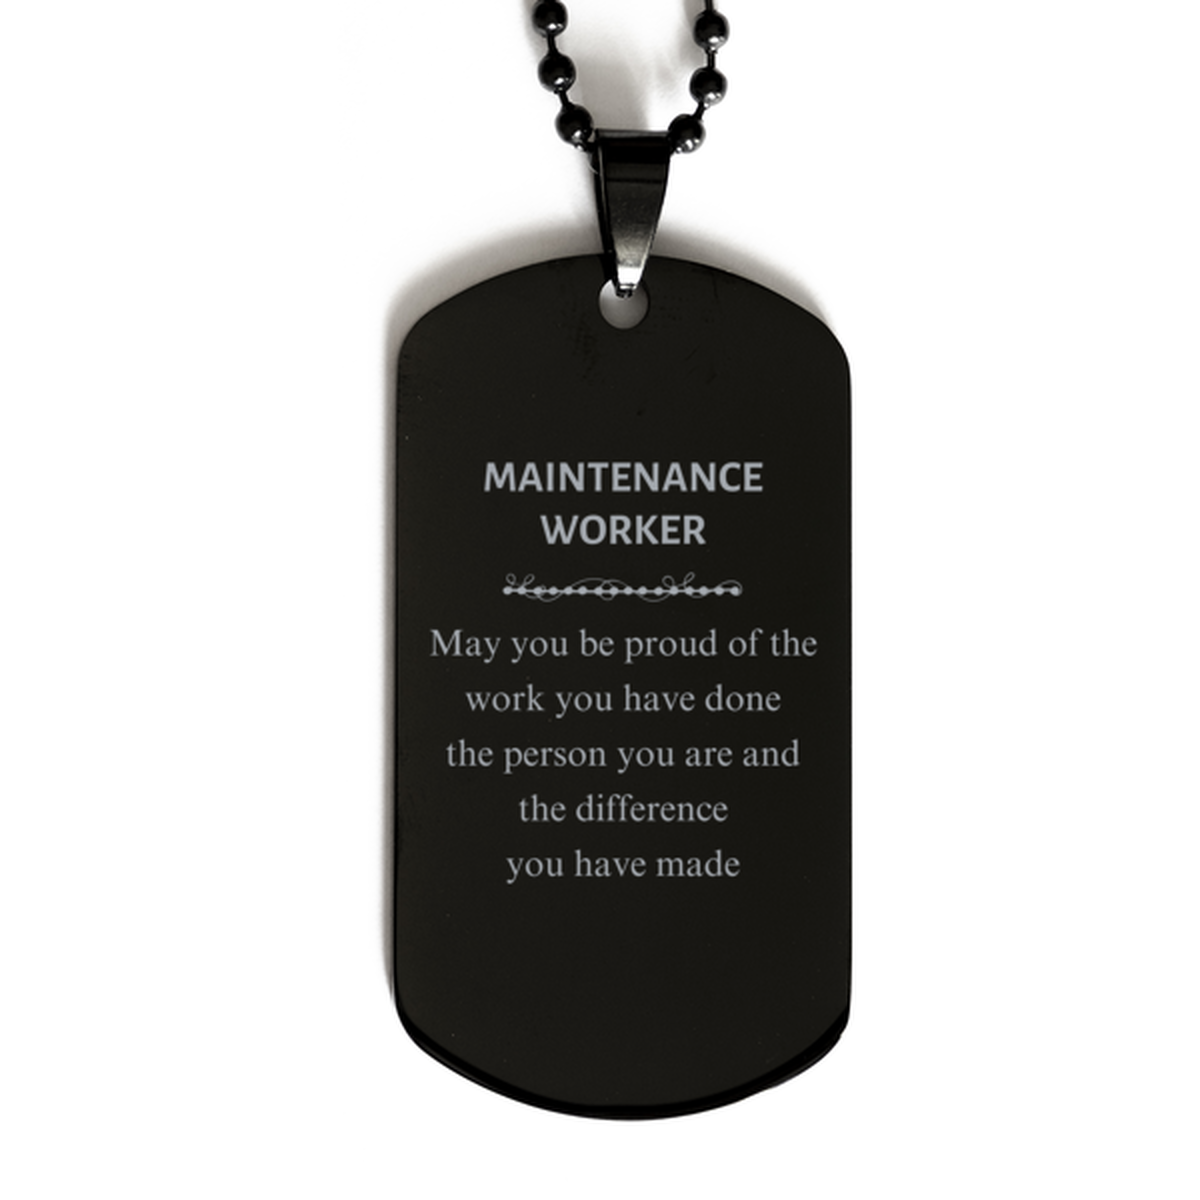 Maintenance Worker May you be proud of the work you have done, Retirement Maintenance Worker Black Dog Tag for Colleague Appreciation Gifts Amazing for Maintenance Worker